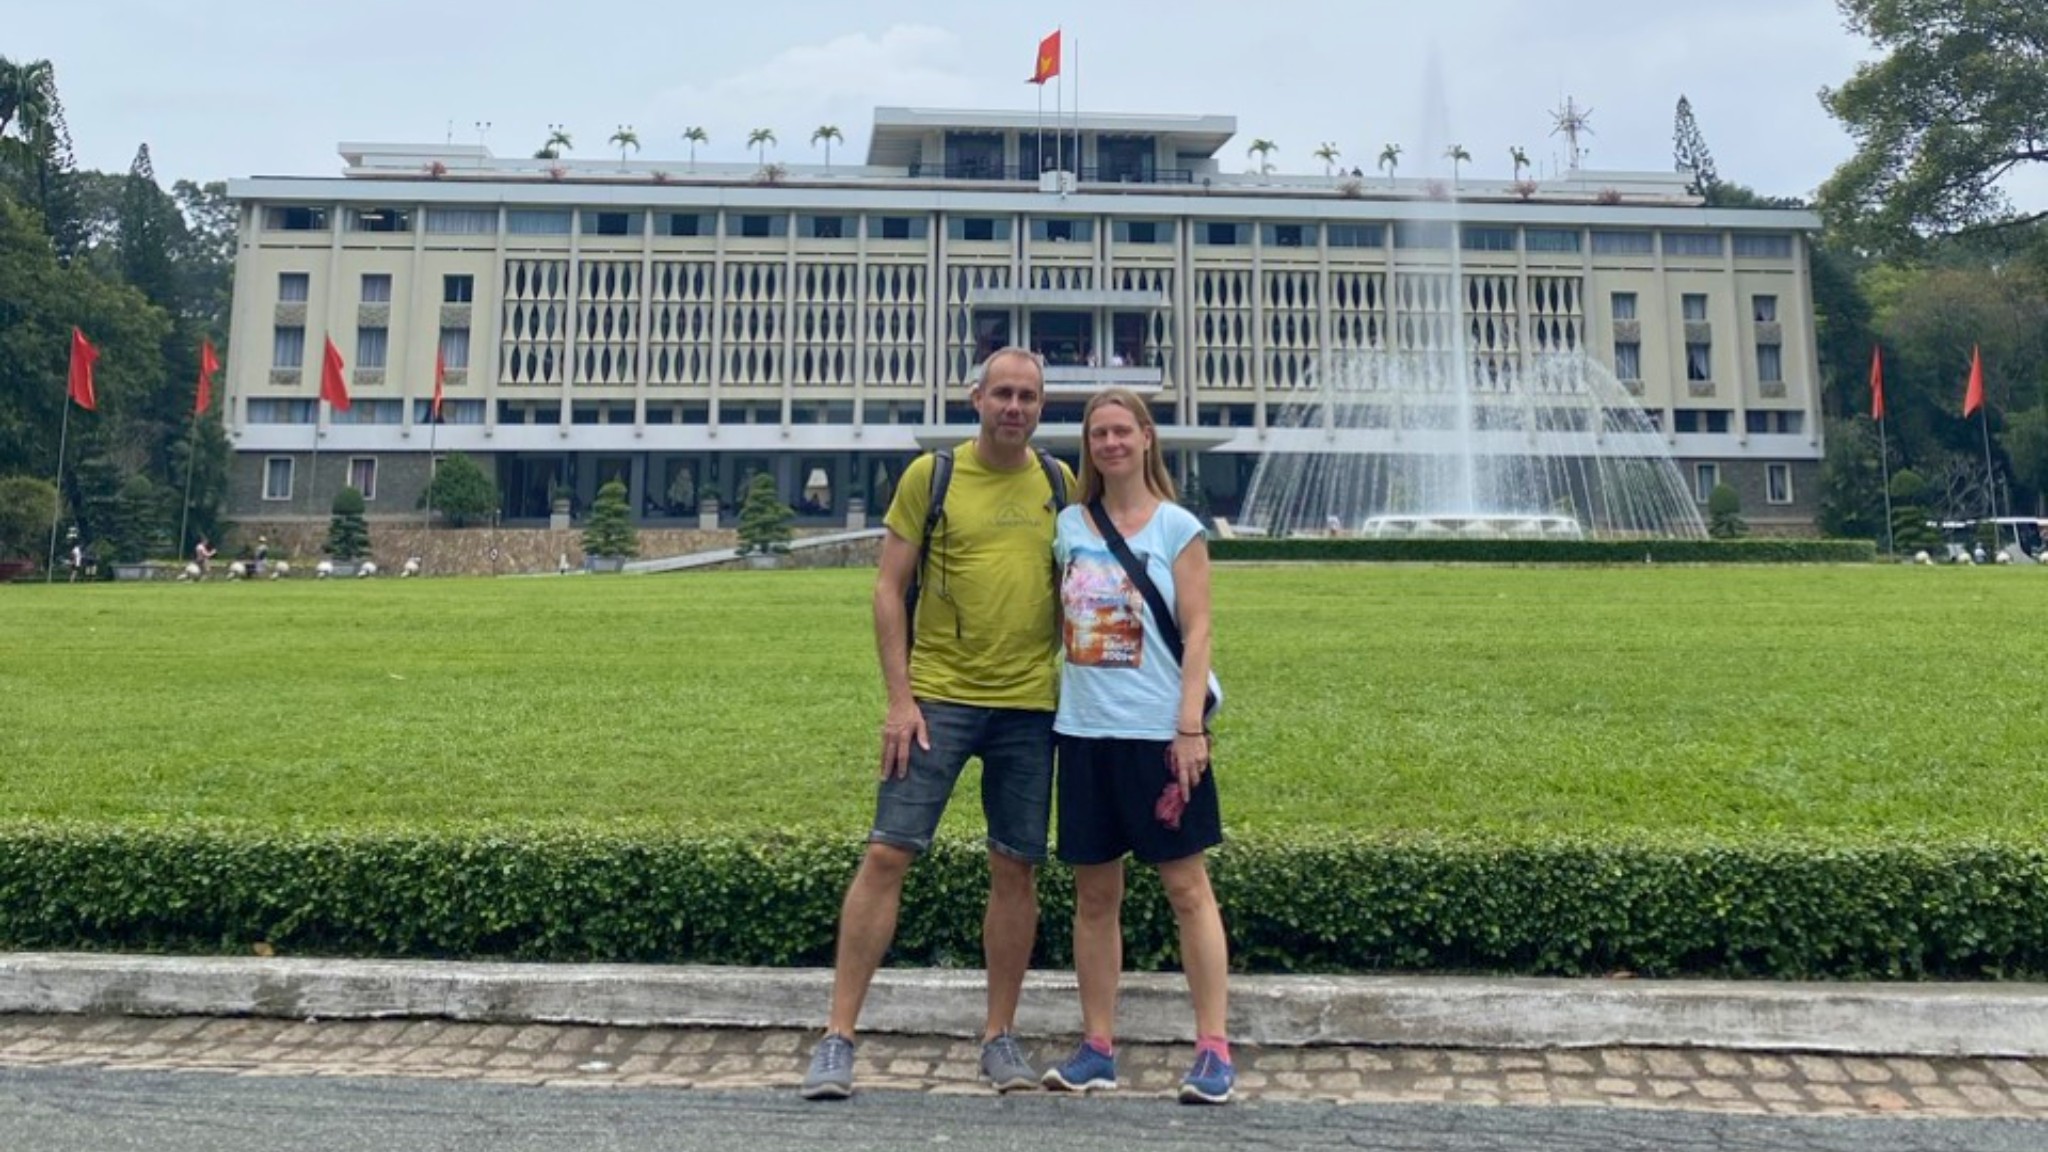 Day 11 Visting The Iconic Reunification Palace